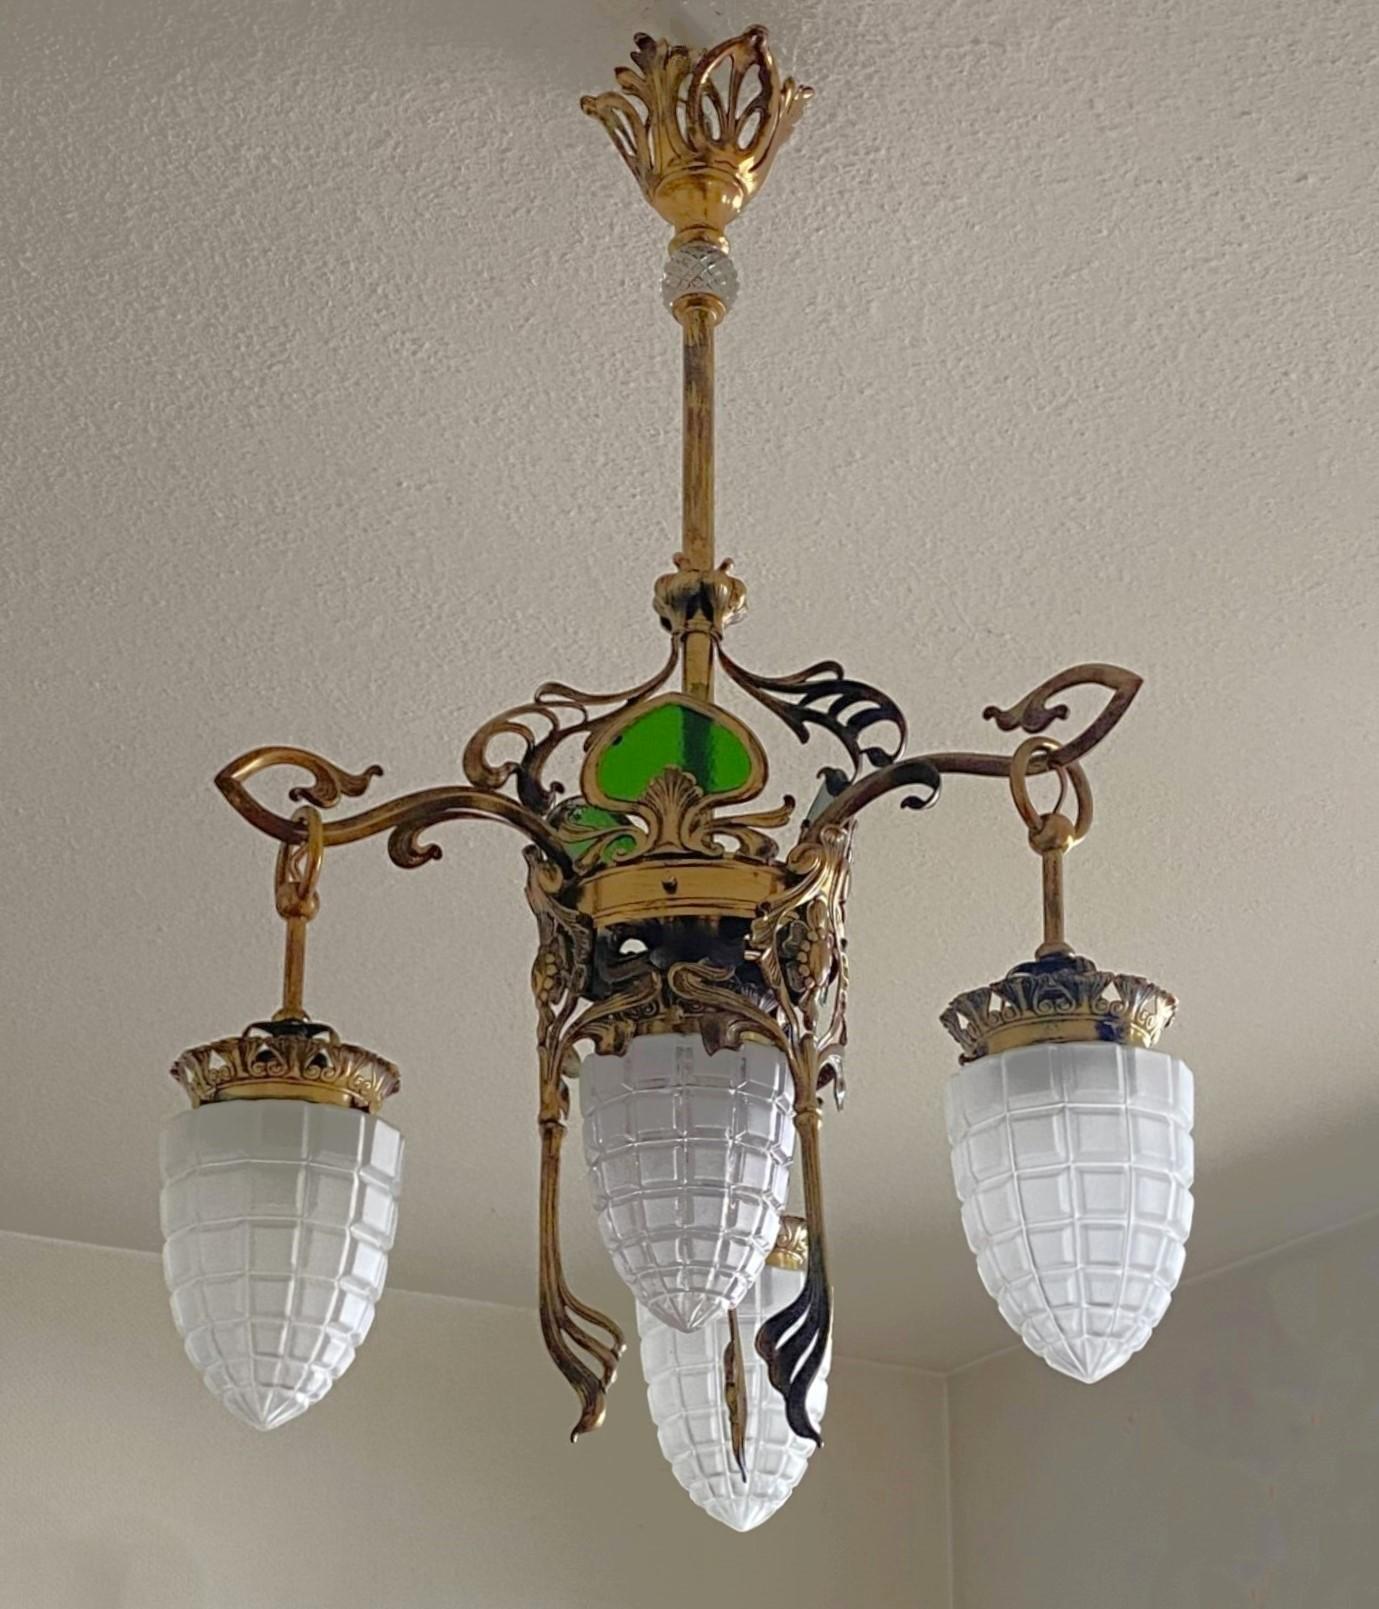 One of kind Art Nouveau period brass and cut glass four-light chandelier, France, 1900-1910. Richly elaborate gilt brass  with wonderful detailing and green glass panels adorning each side, three side and one central lamp arms with four frost-cut